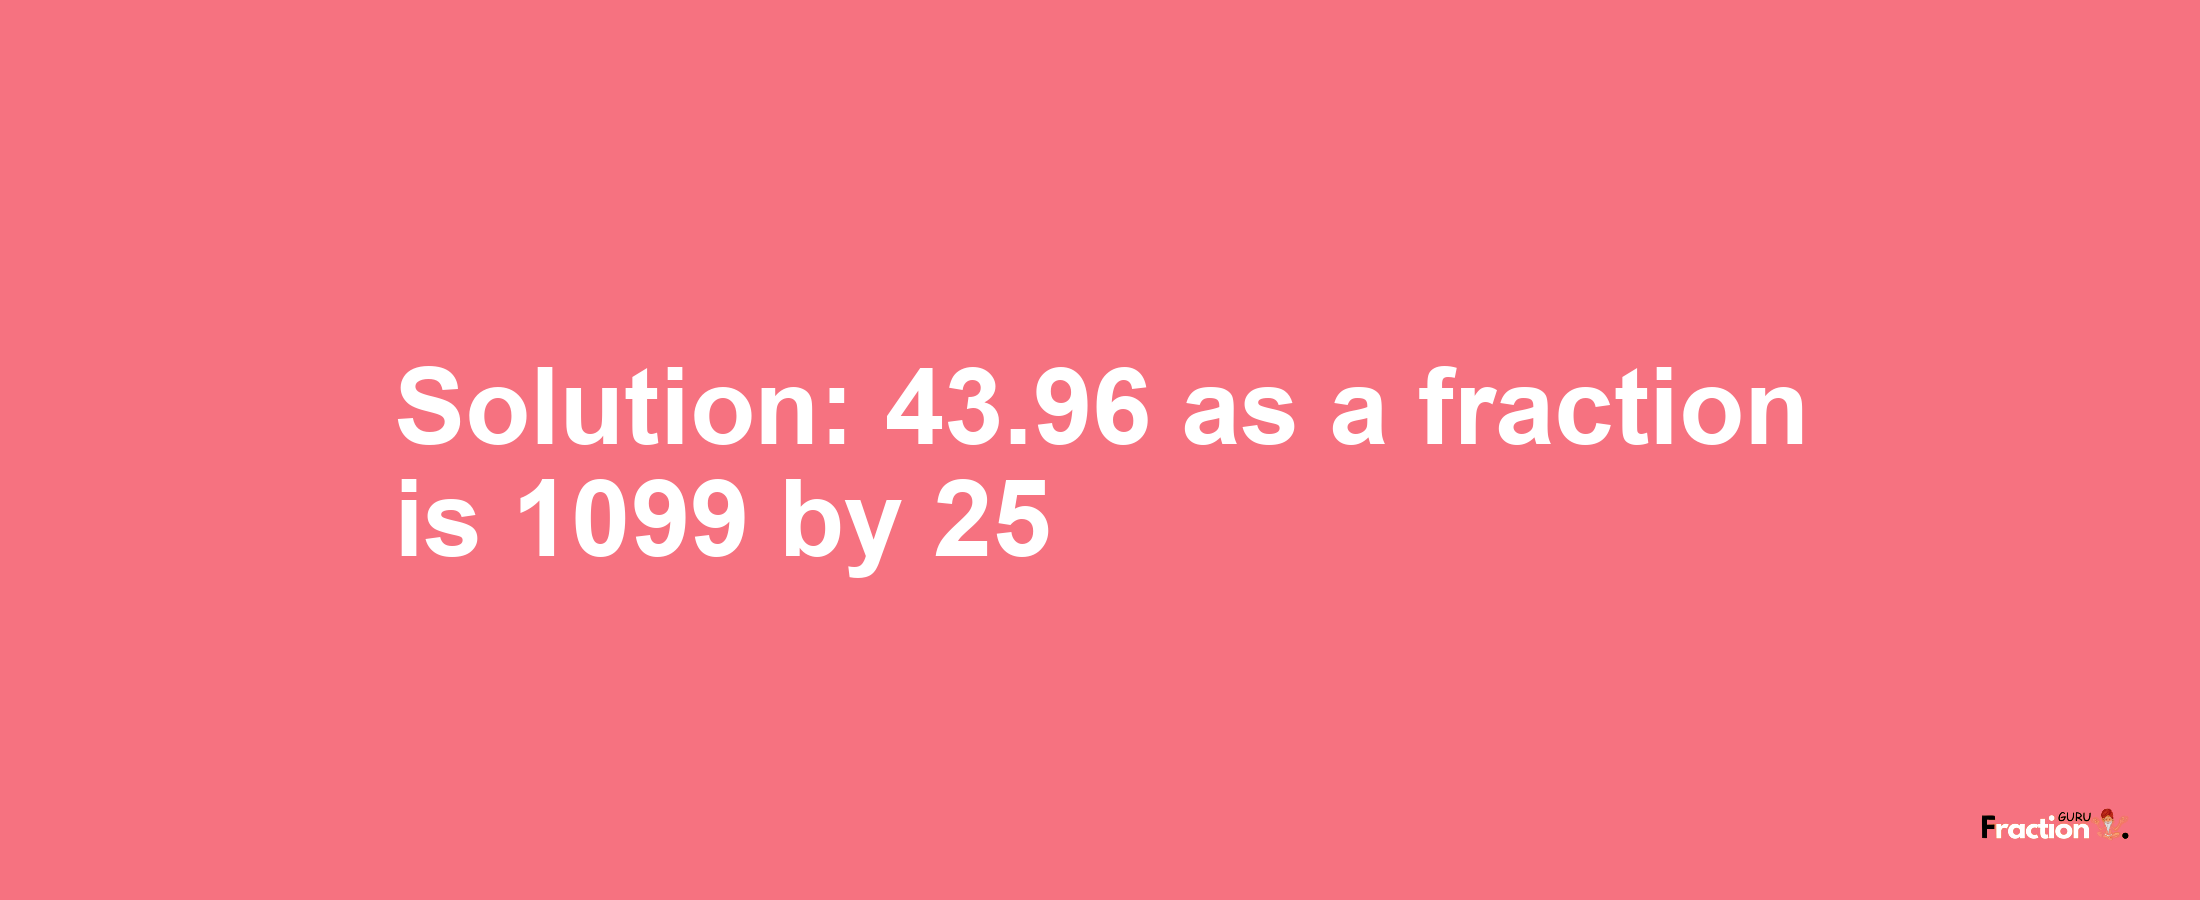 Solution:43.96 as a fraction is 1099/25